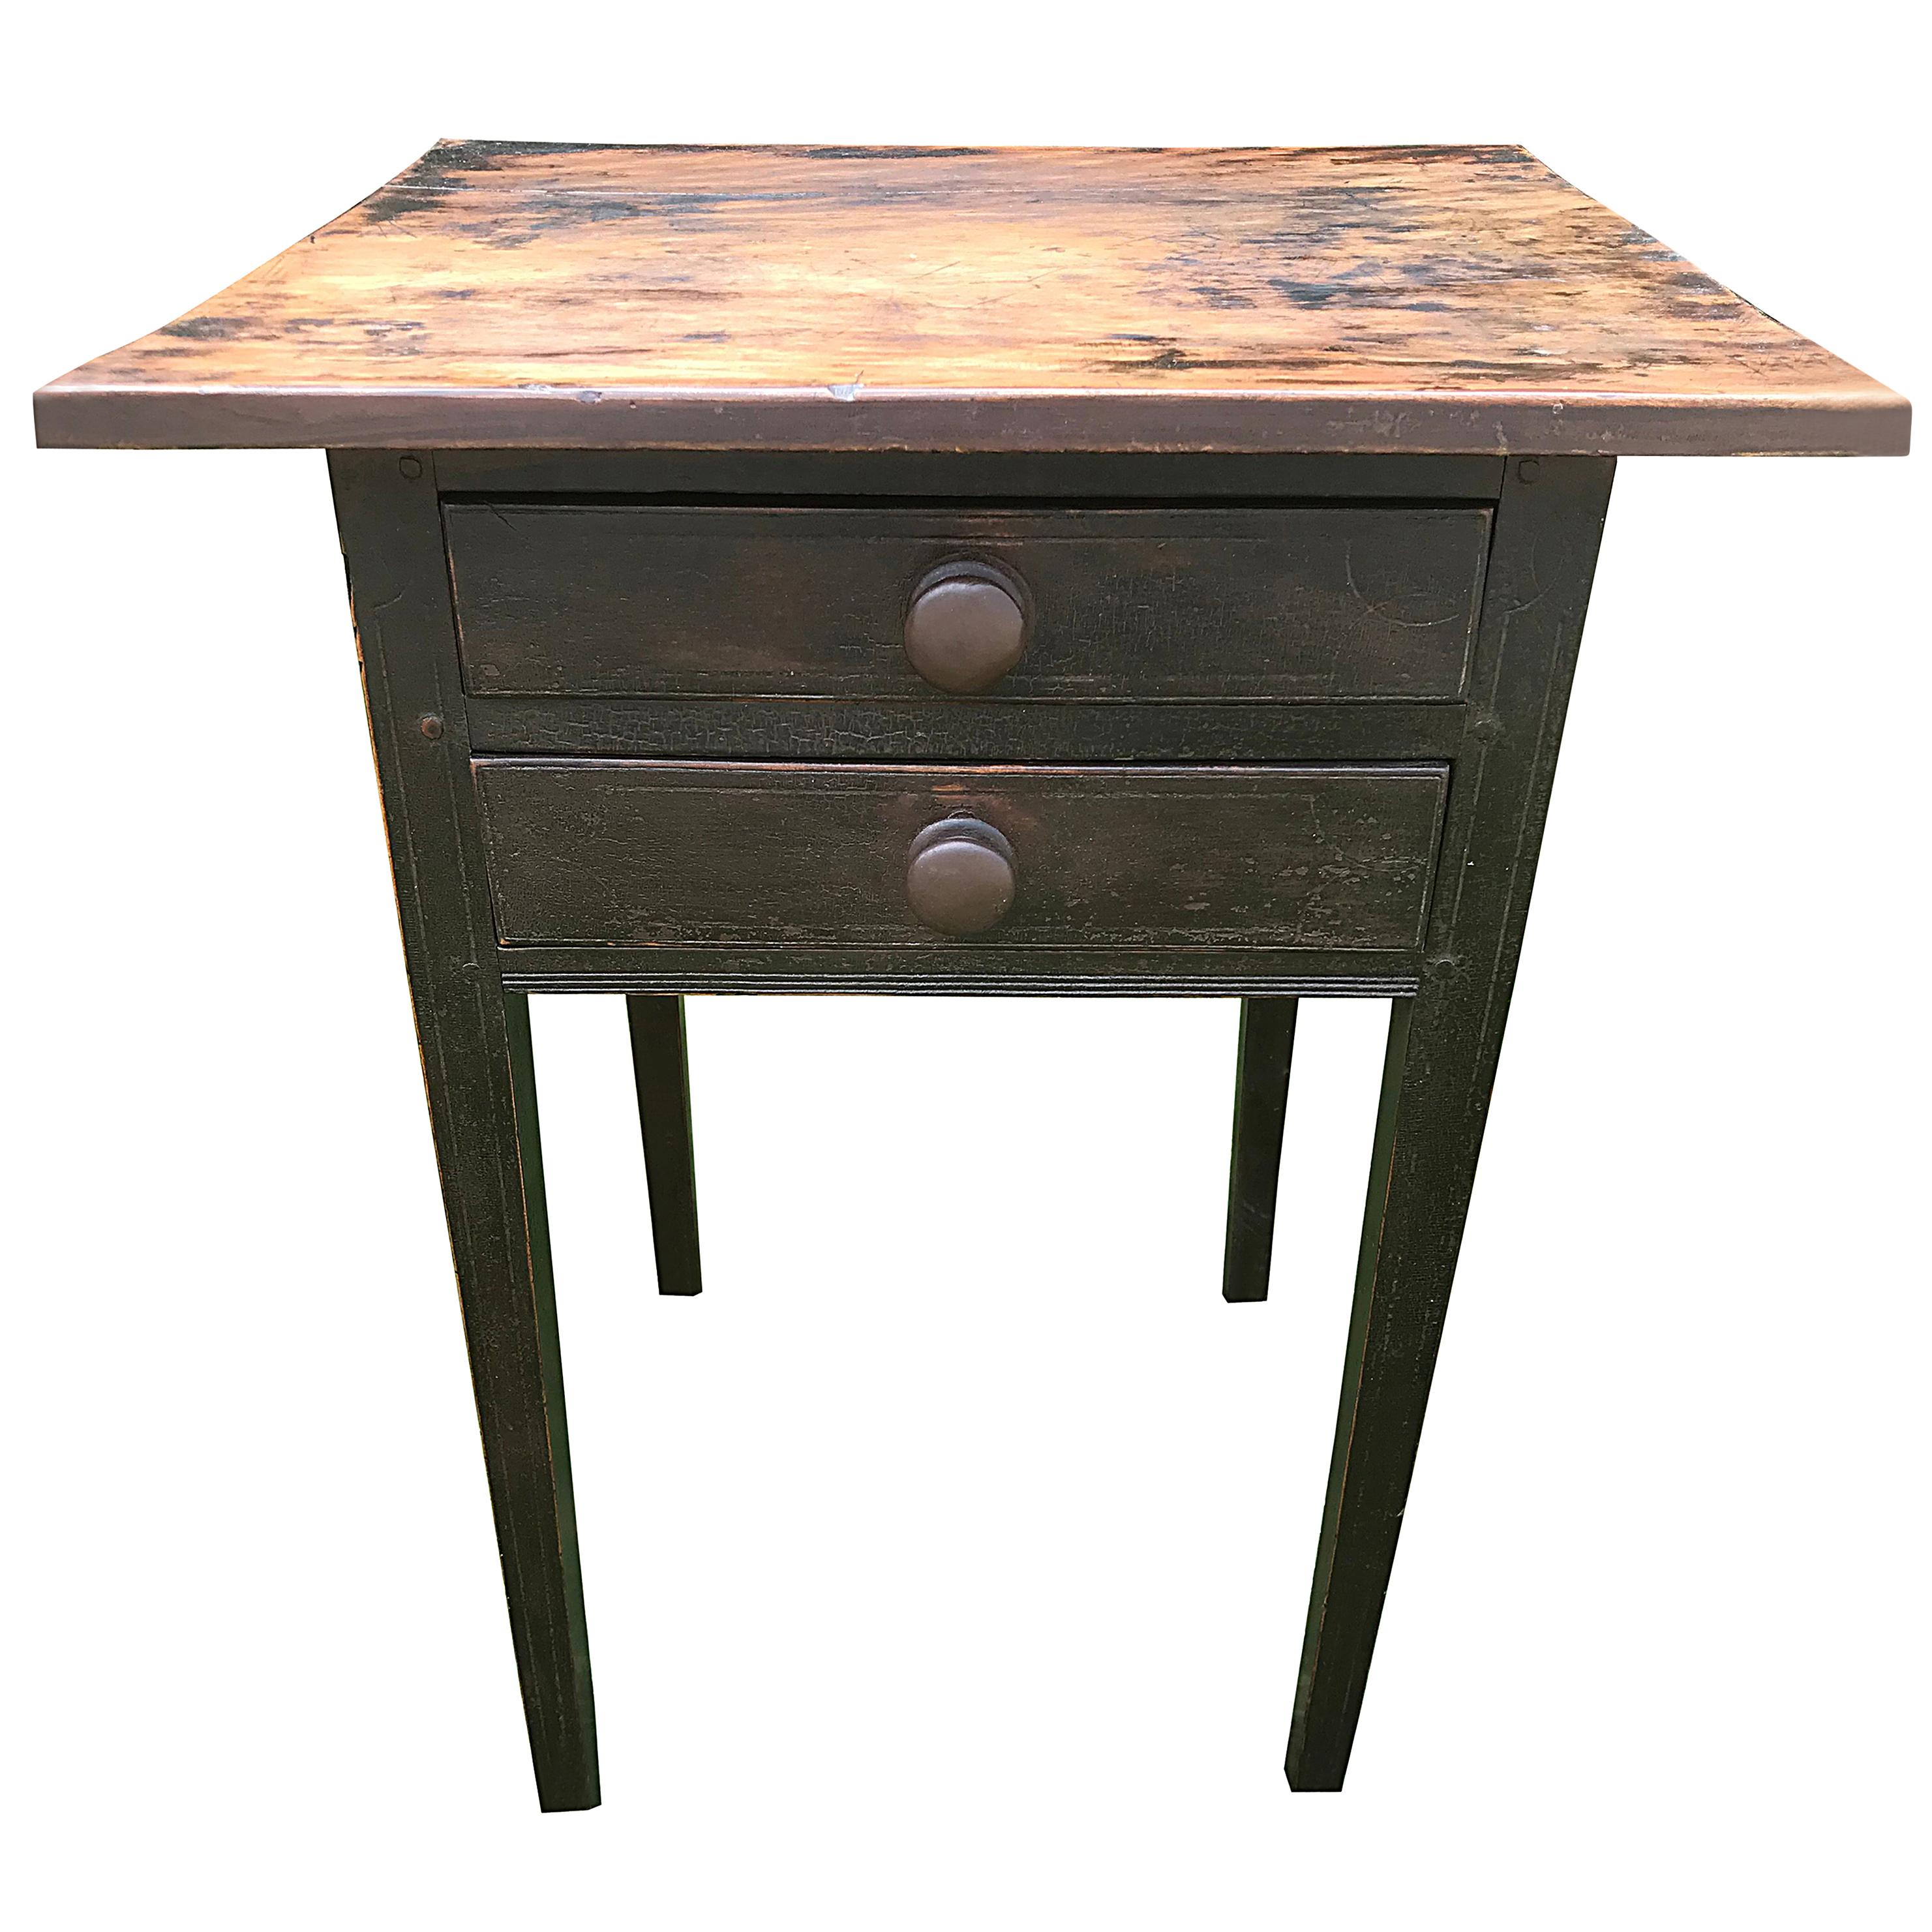 Side Table with Dark Painted Base and Knobs